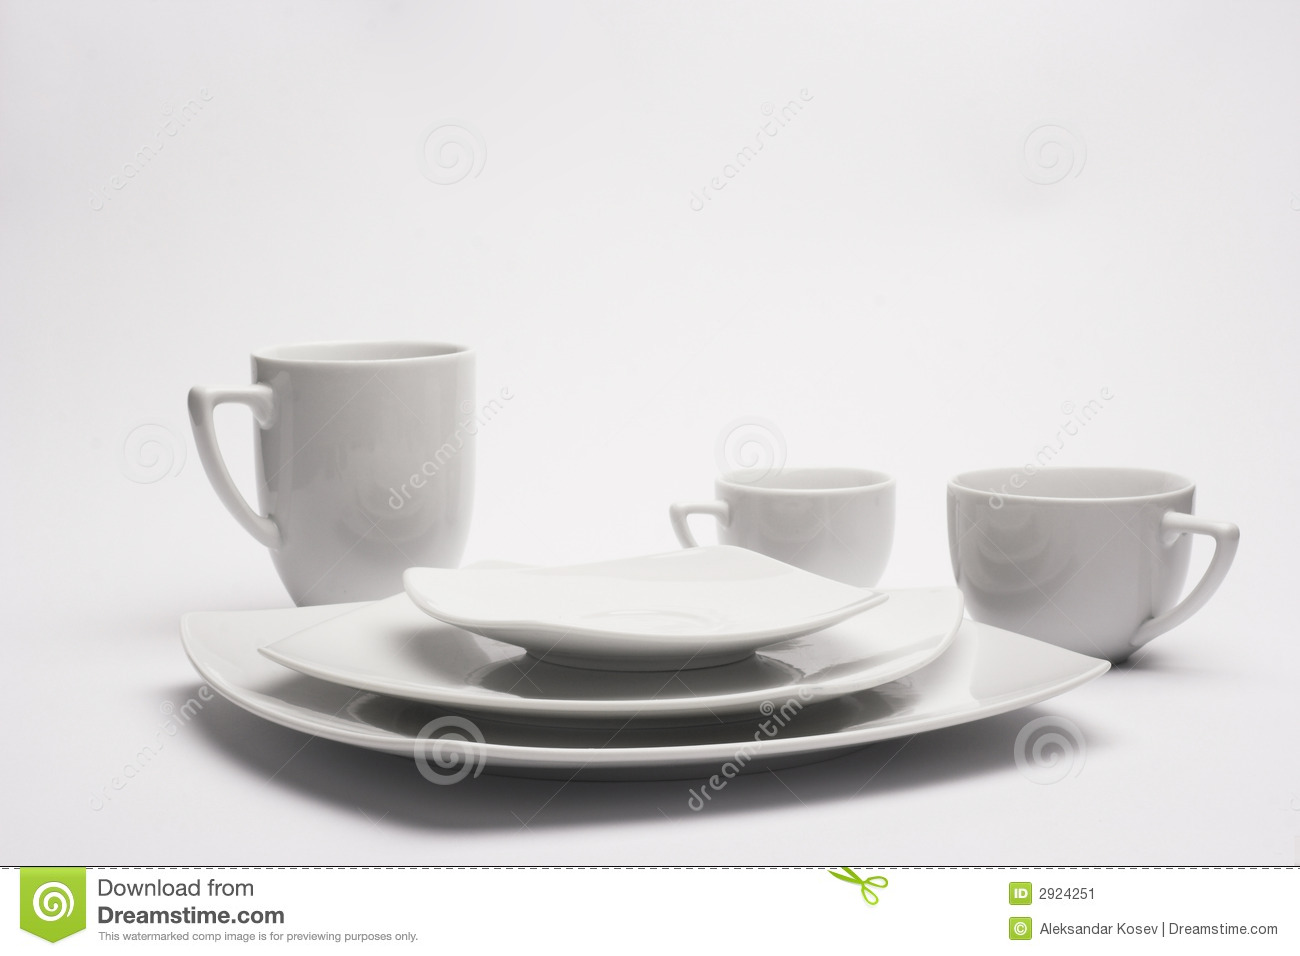 White Plates And Cups Stock Image   Image  2924251